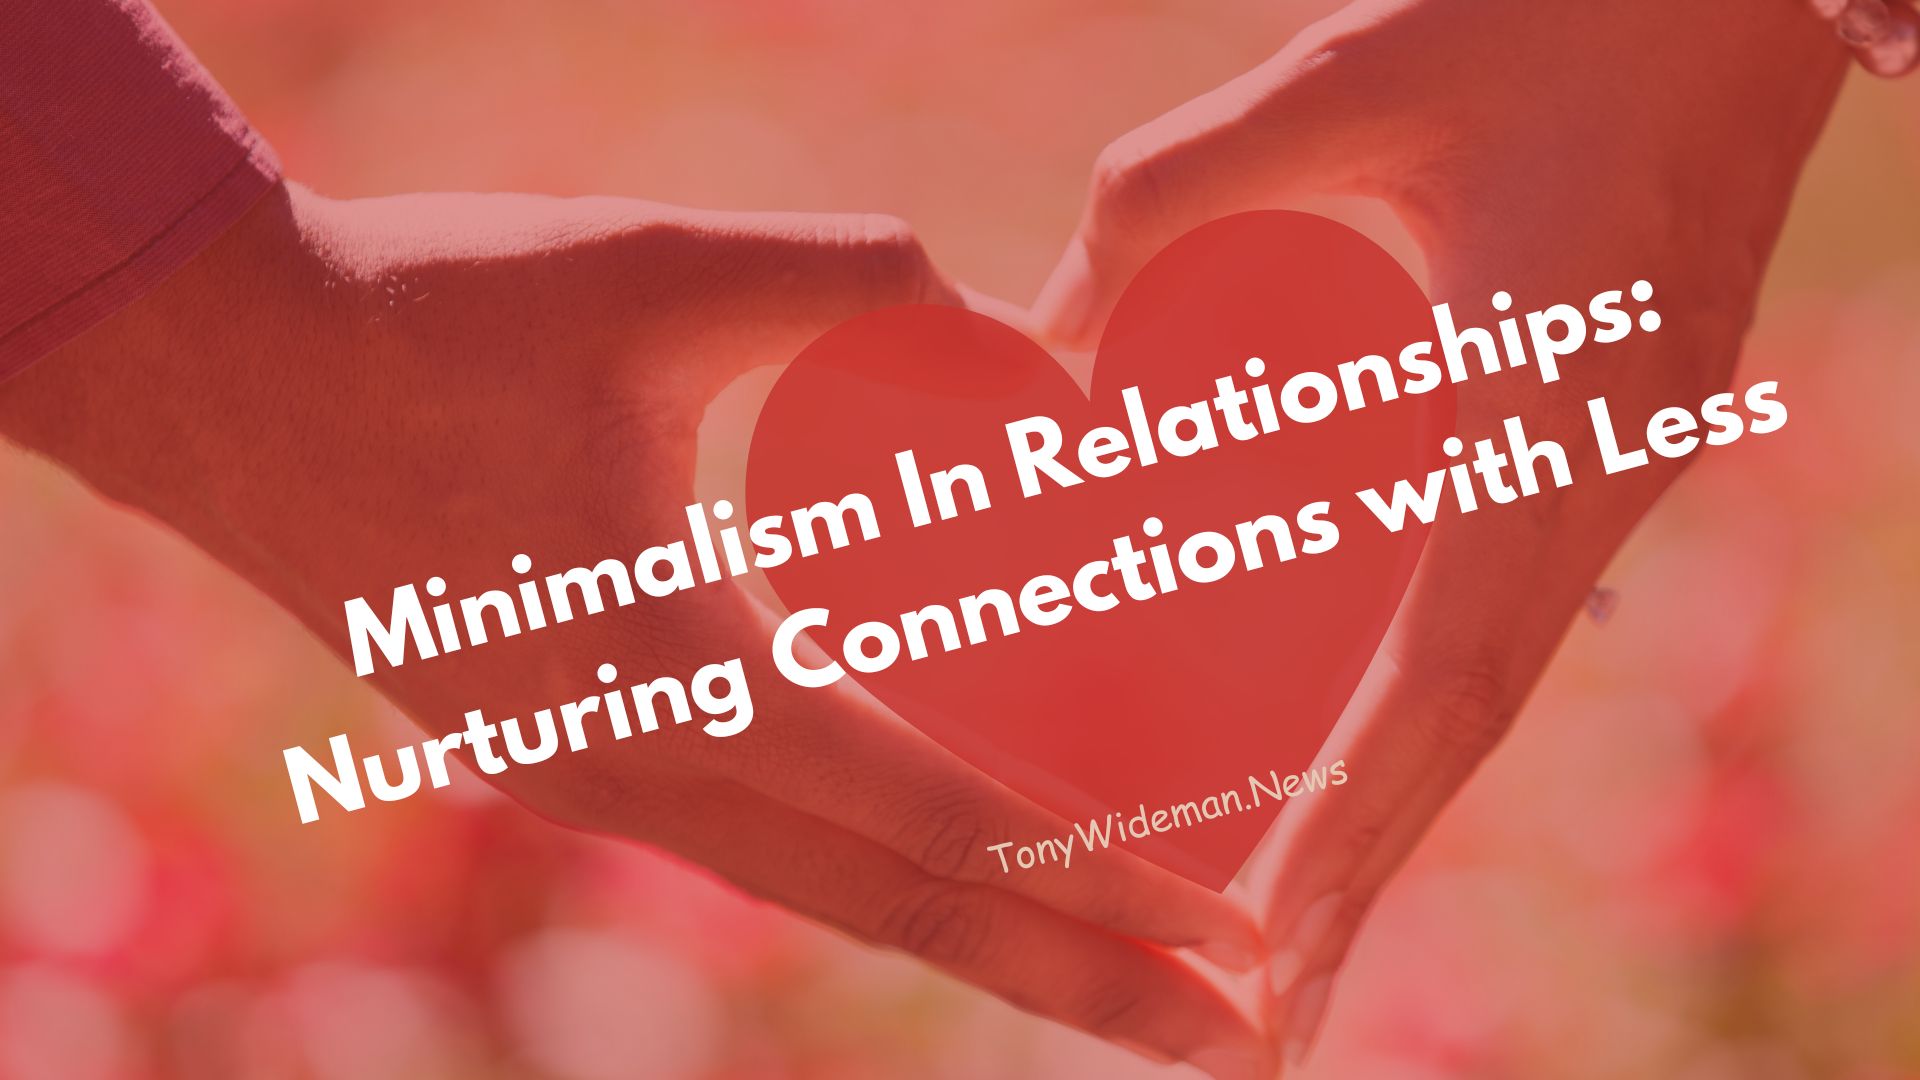 Minimalism In Relationships: Nurturing Connections with Less